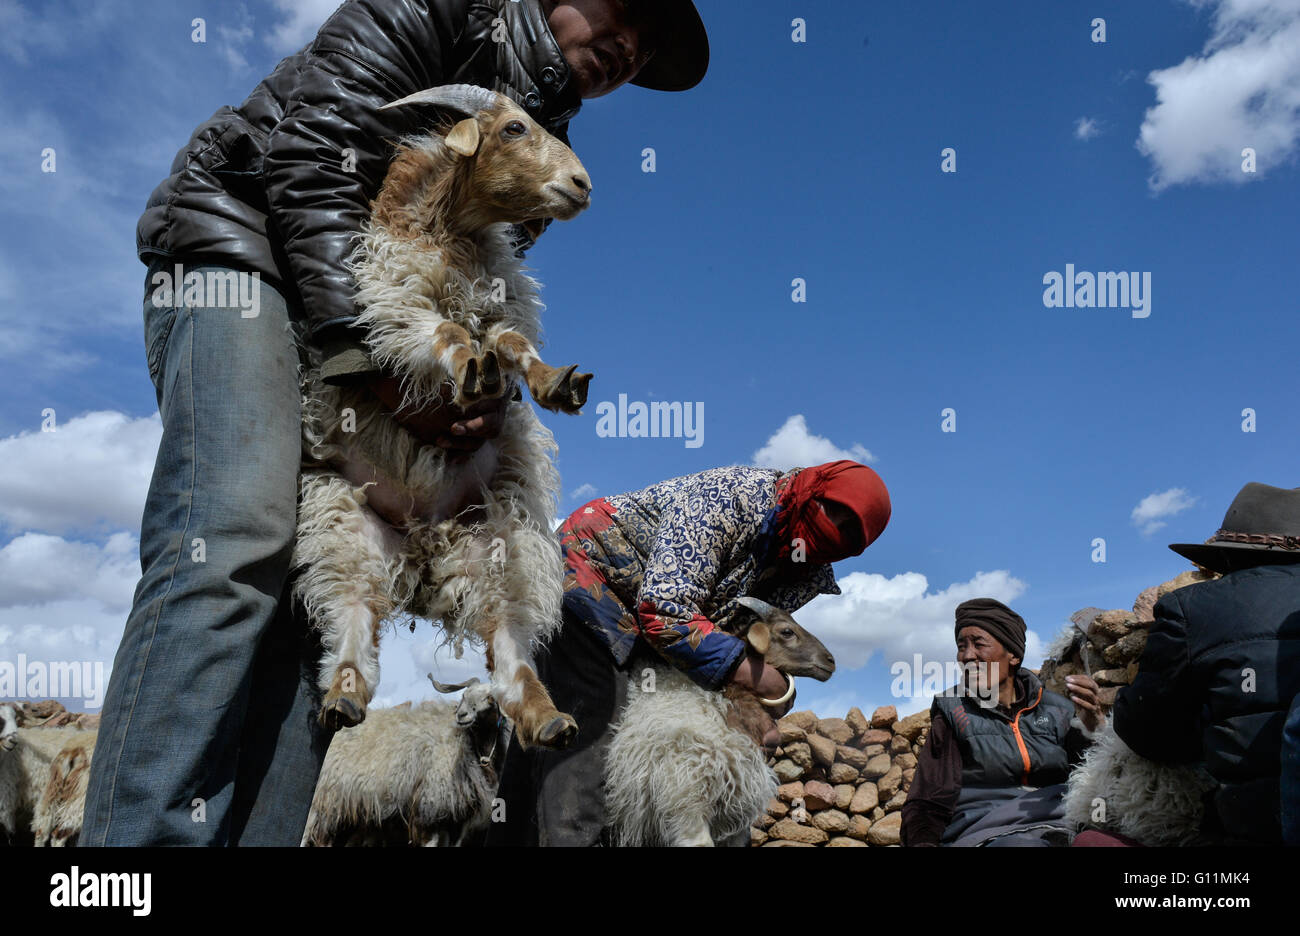 Lhasa, China's Tibet Autonomous Region. 5th May, 2016. Herdsmen prepare to castrate male sheep on the riverside of Nam Co, southwest China's Tibet Autonomous Region, May 5, 2016. A sheep castration cermeony, which has been observed for more than 1,000 years by the herdsmen living in the northern part of Tibet region, was held on the riverside of Nam Co. In order to breed sheep of the best quality, despite a few robust male sheep, most of the male sheep of more than 5 months old here will be castrated and bred as mutton sheep. © Purbu Zhaxi/Xinhua/Alamy Live News Stock Photo